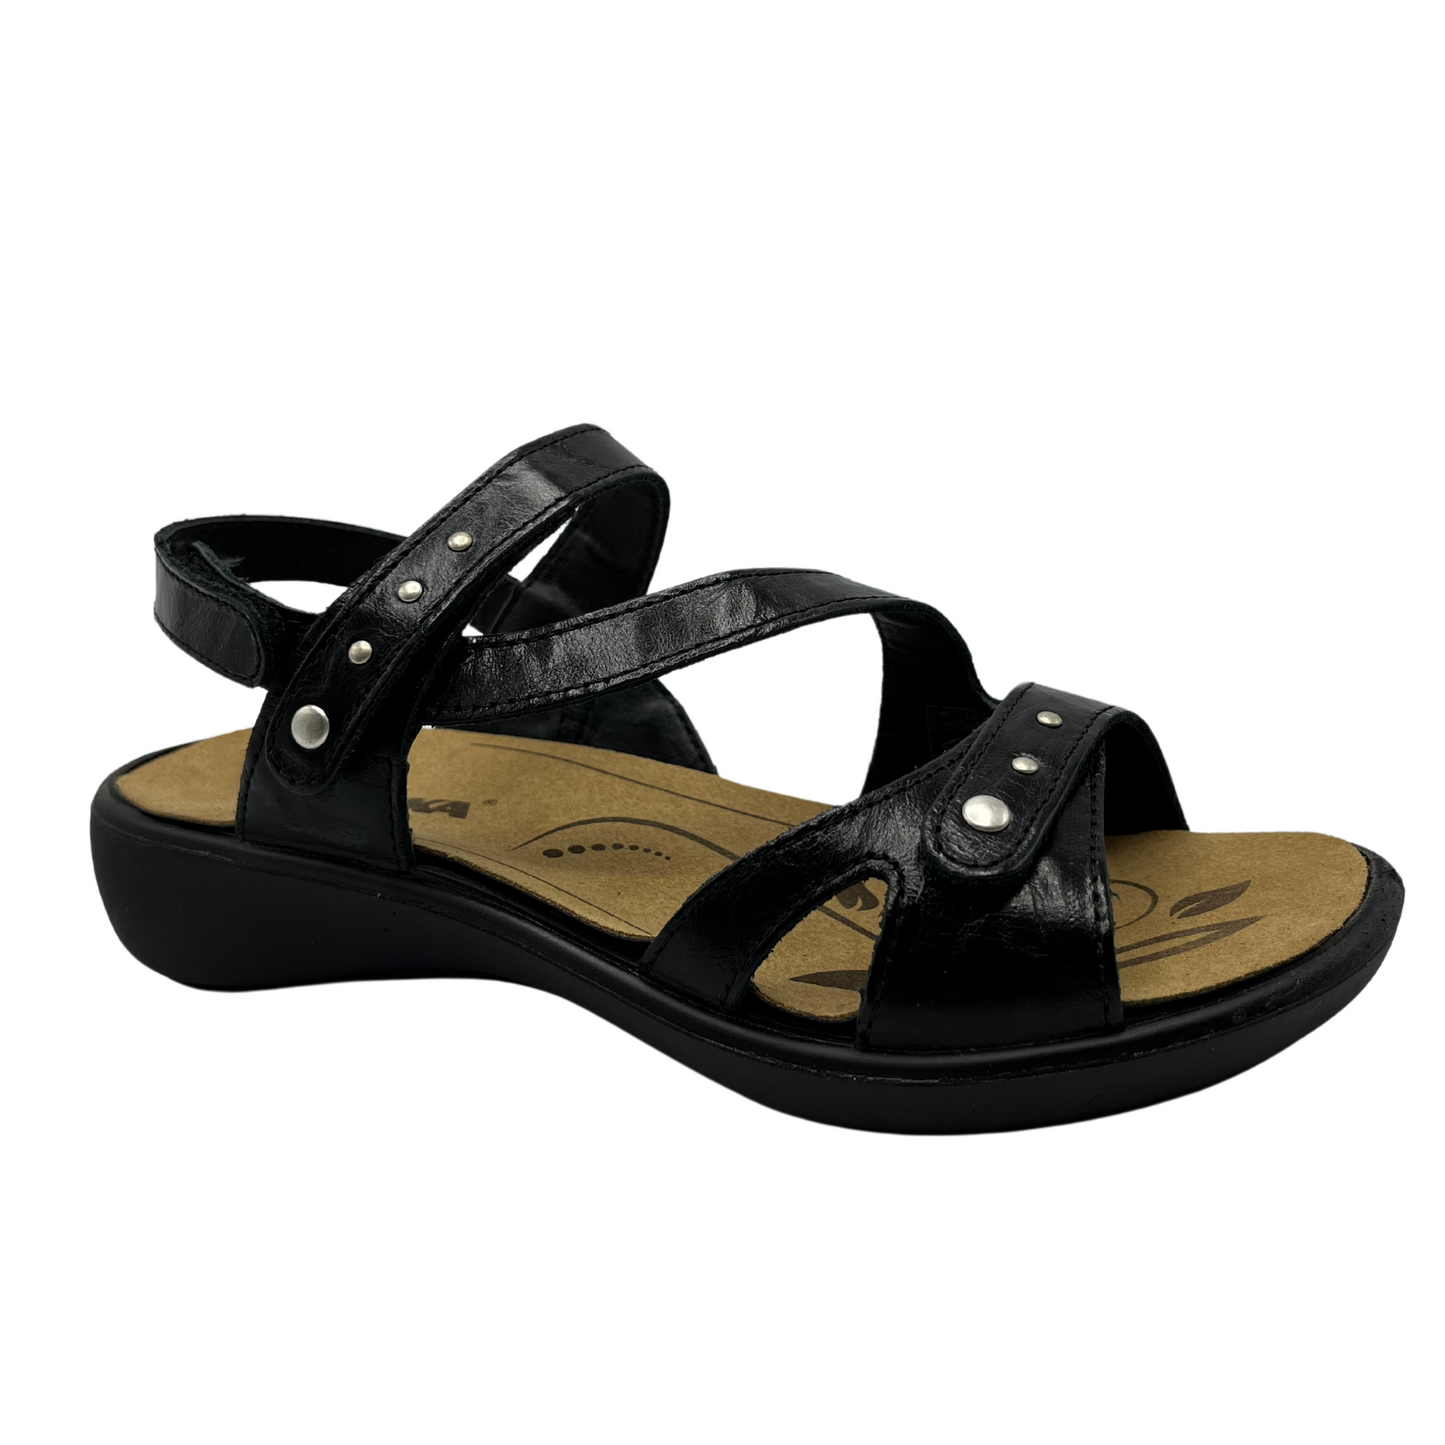 45 degree angled view of black leather sandal with brown lining and silver studs on straps